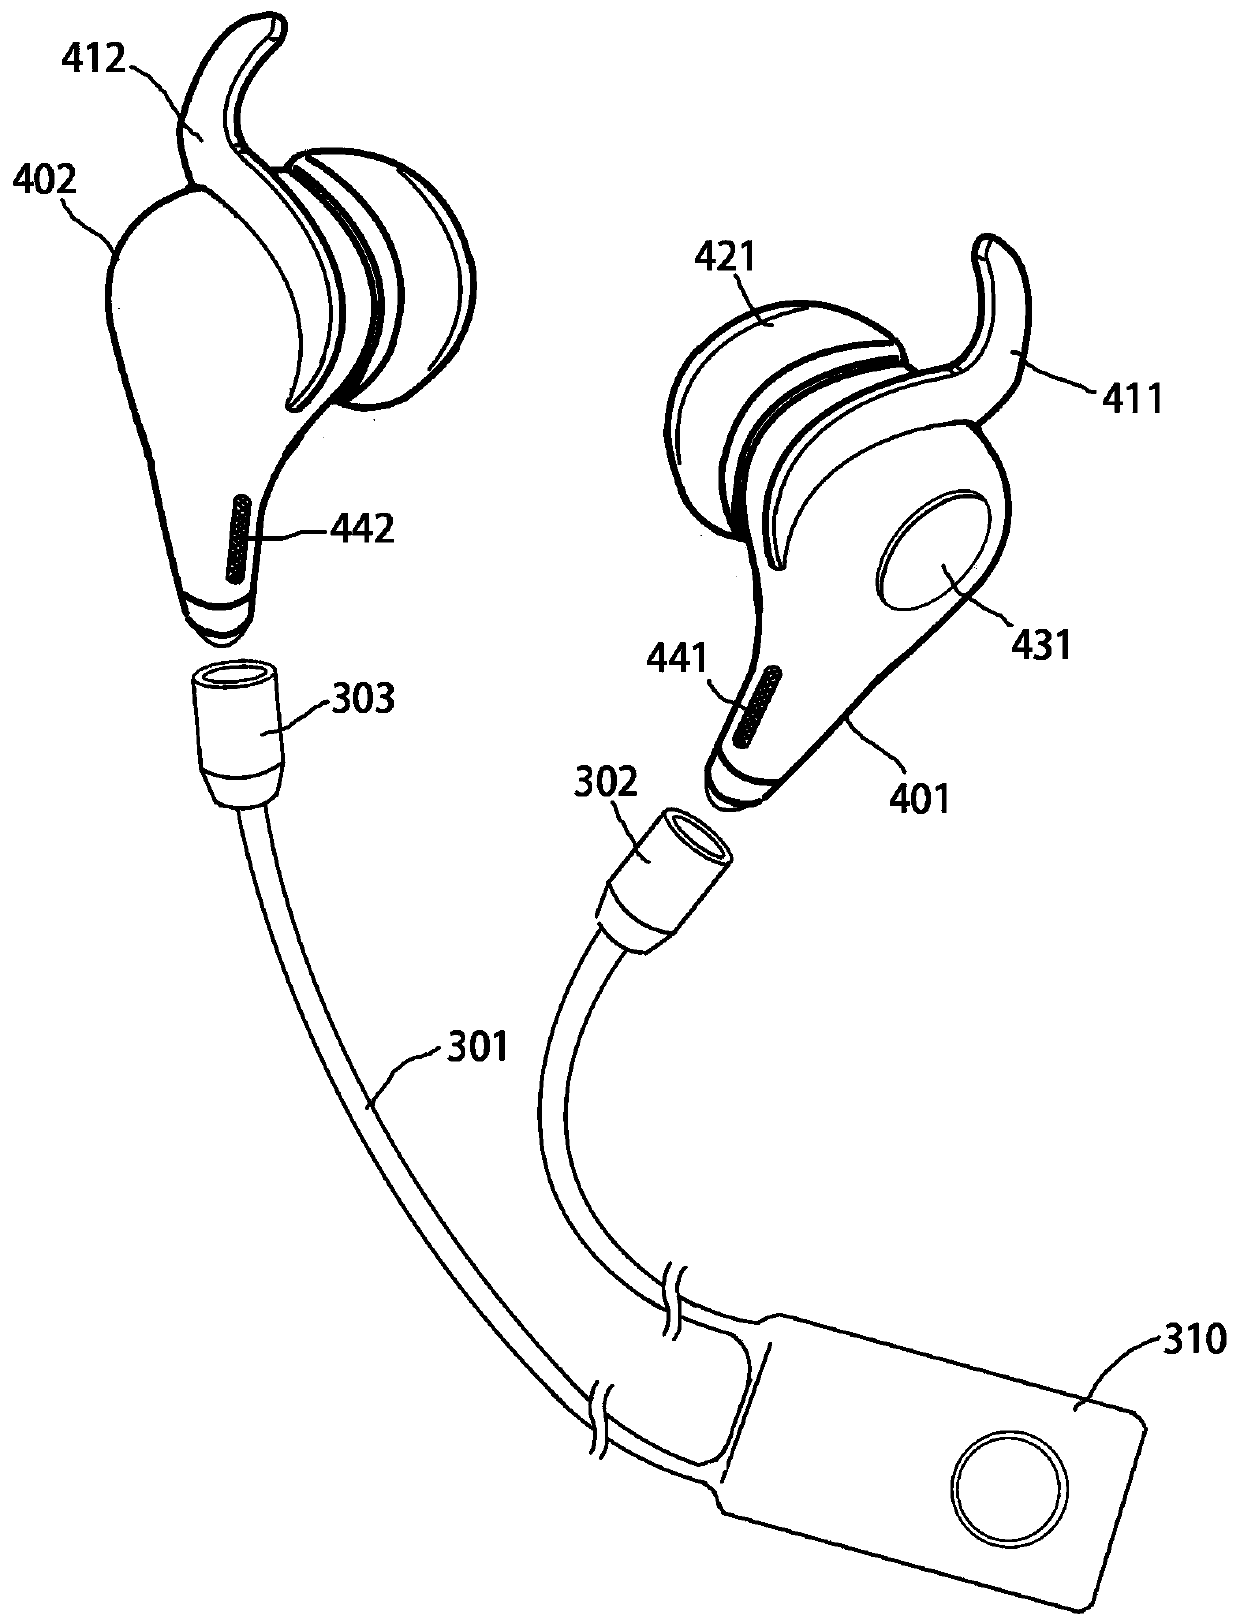 Method for transmitting audio information by using wireless earphone